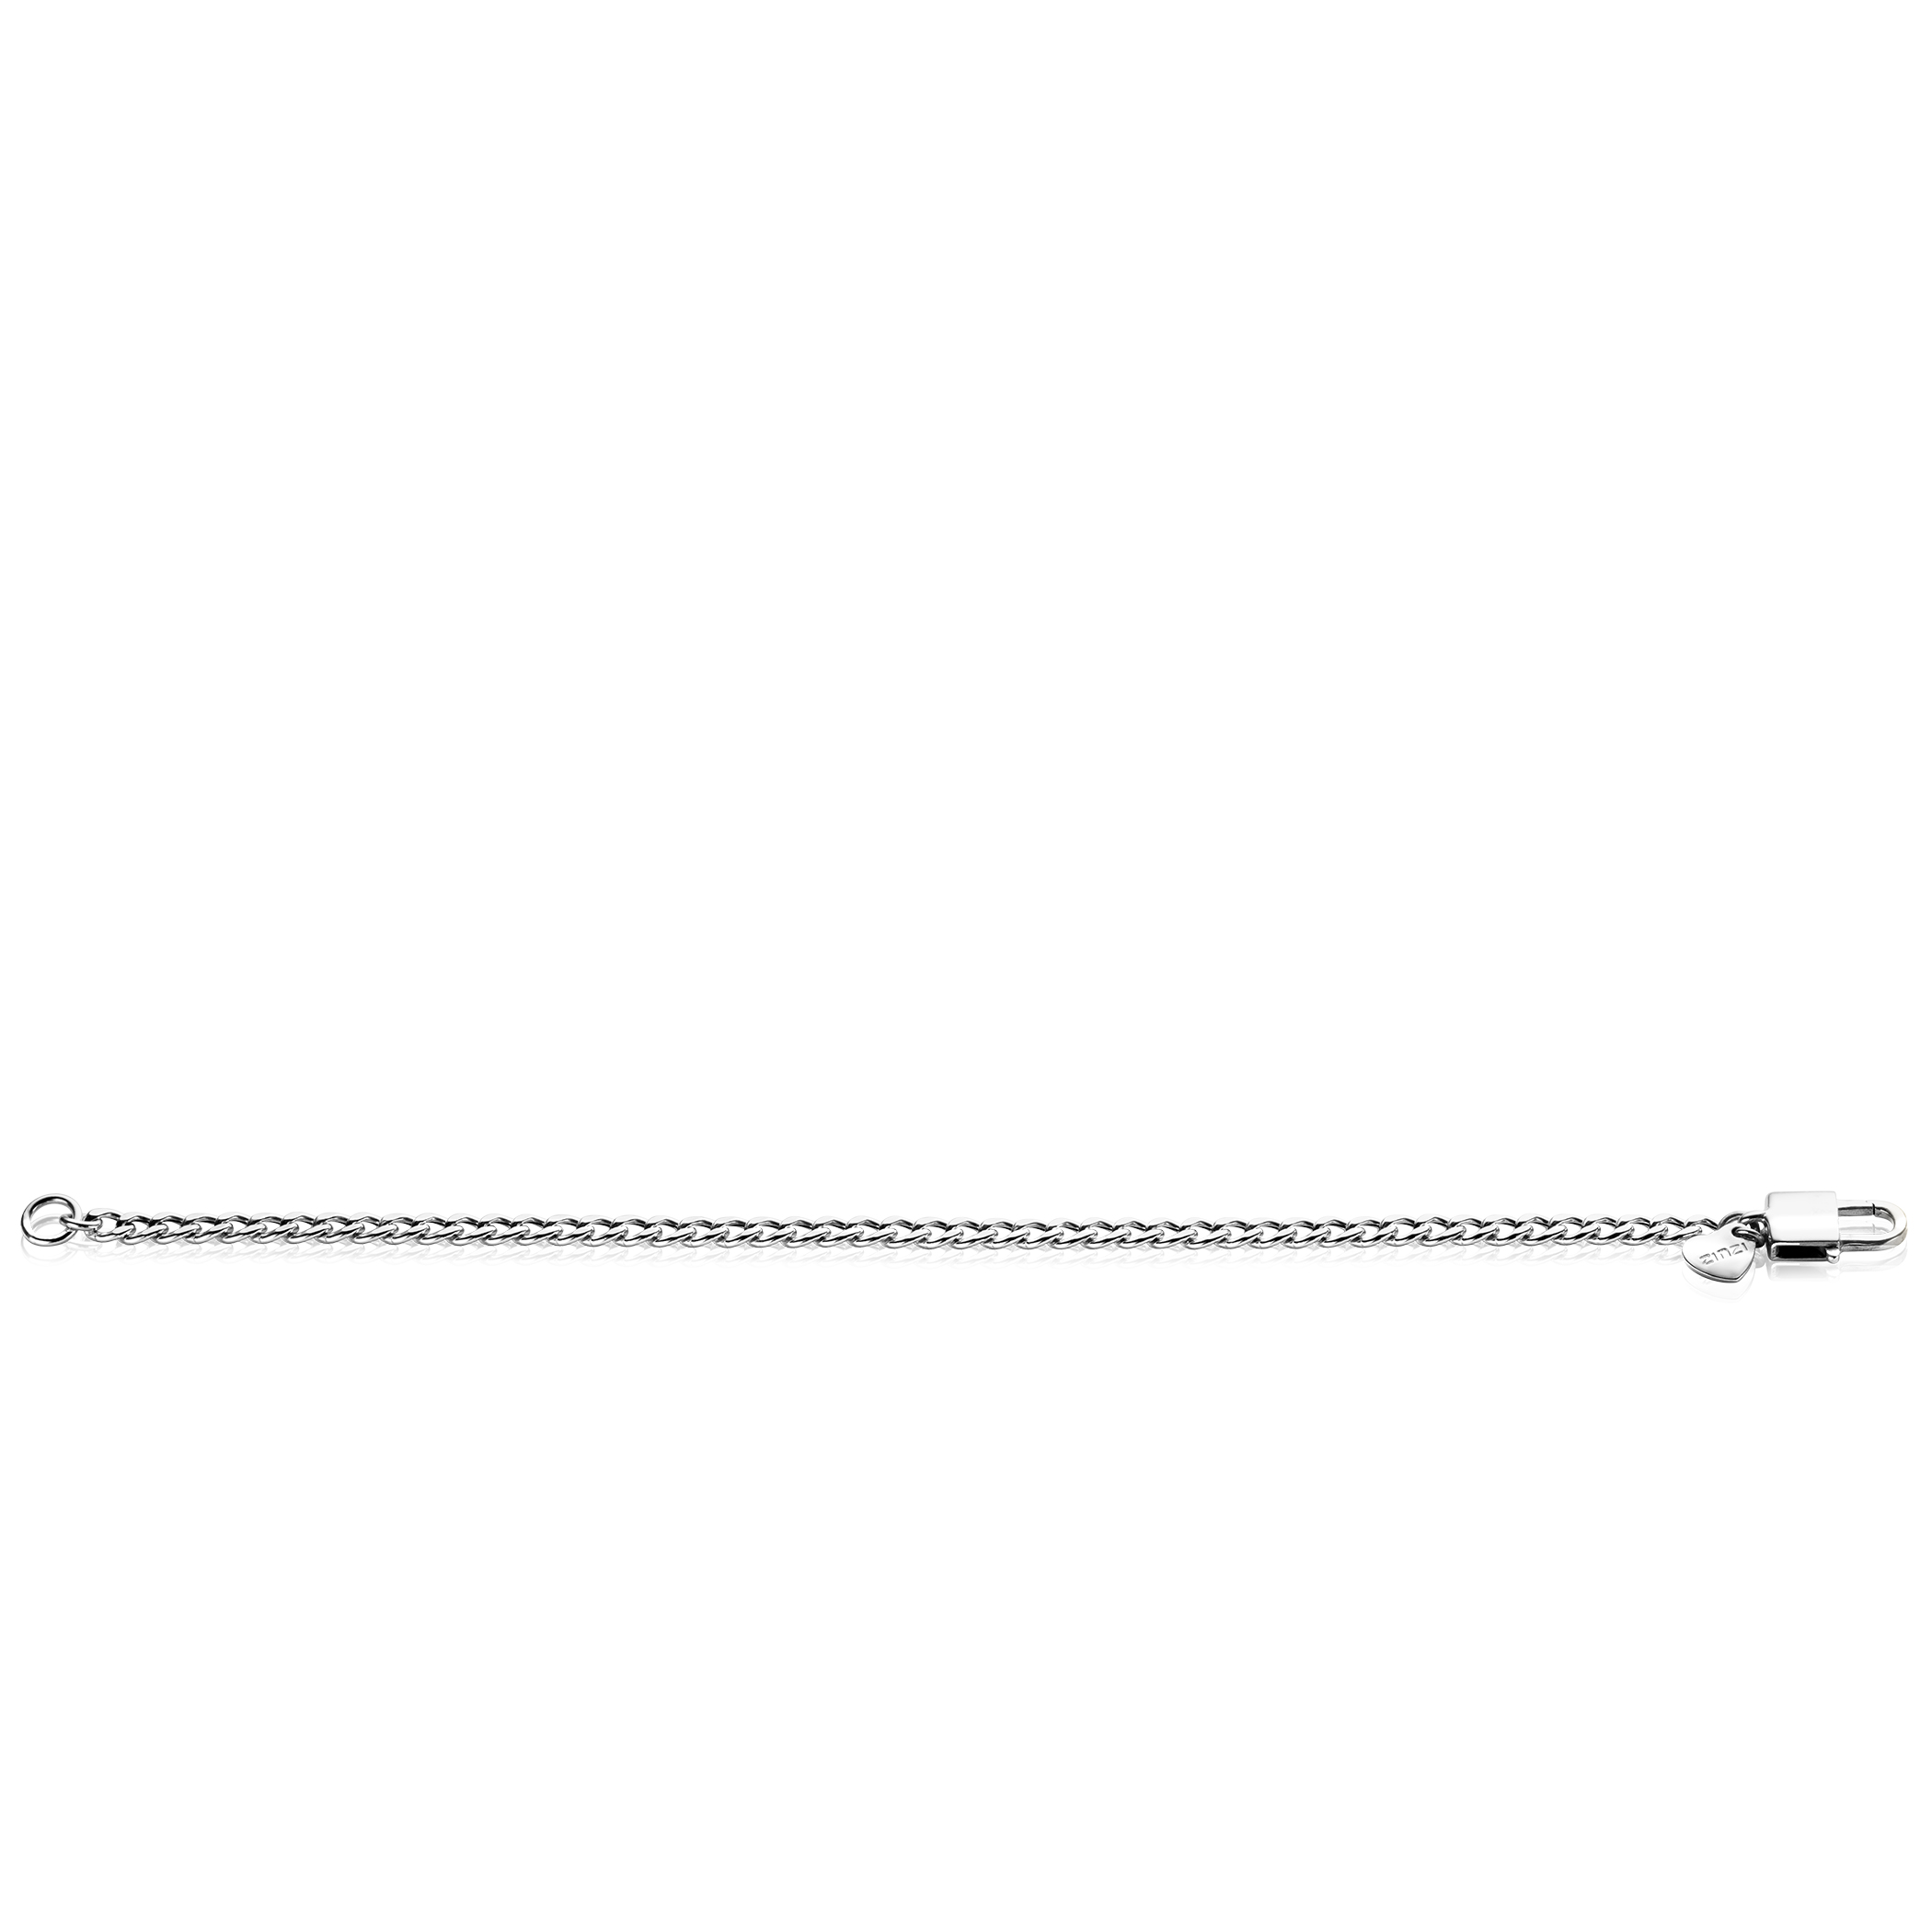 ZINZI Sterling Silver Curb Chain Bracelet width 3,8 mm with Trendy Shiny Lock as Clasp 18,5 cm ZIA2411